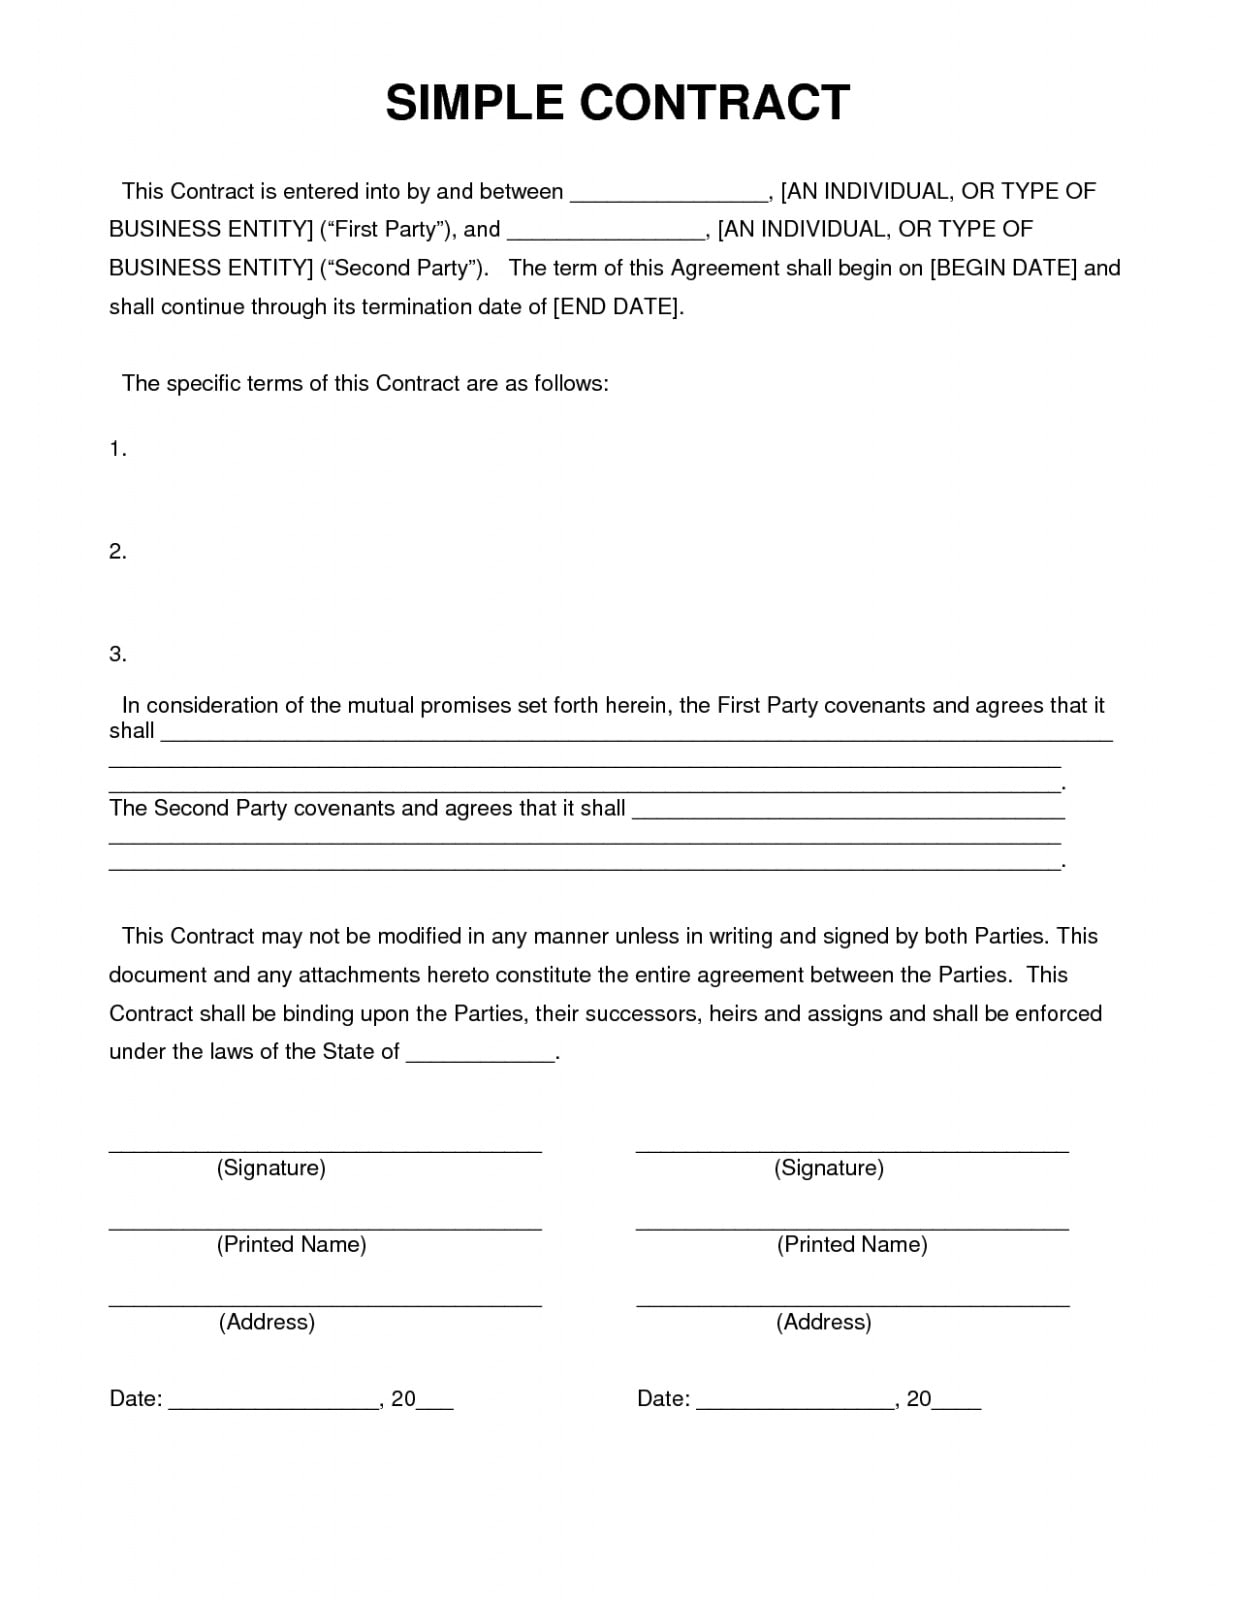 simple contract agreement letter example